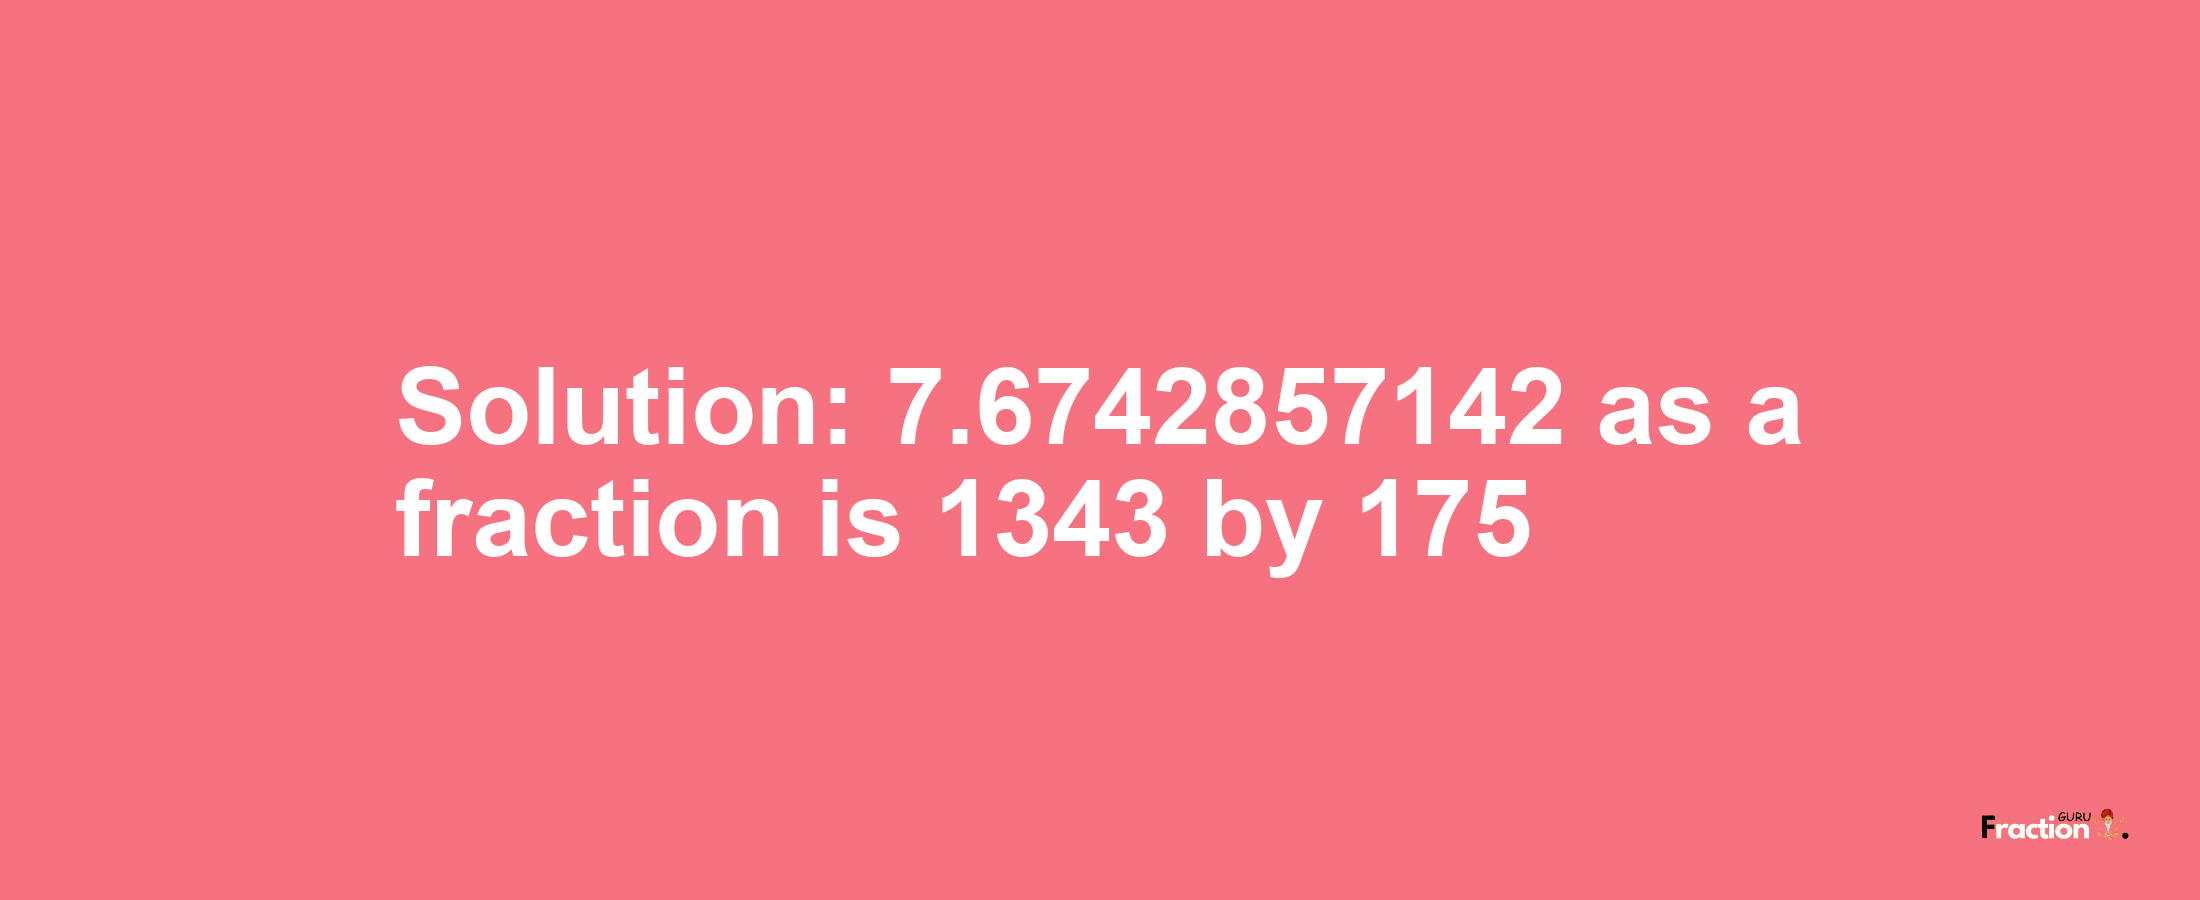 Solution:7.6742857142 as a fraction is 1343/175